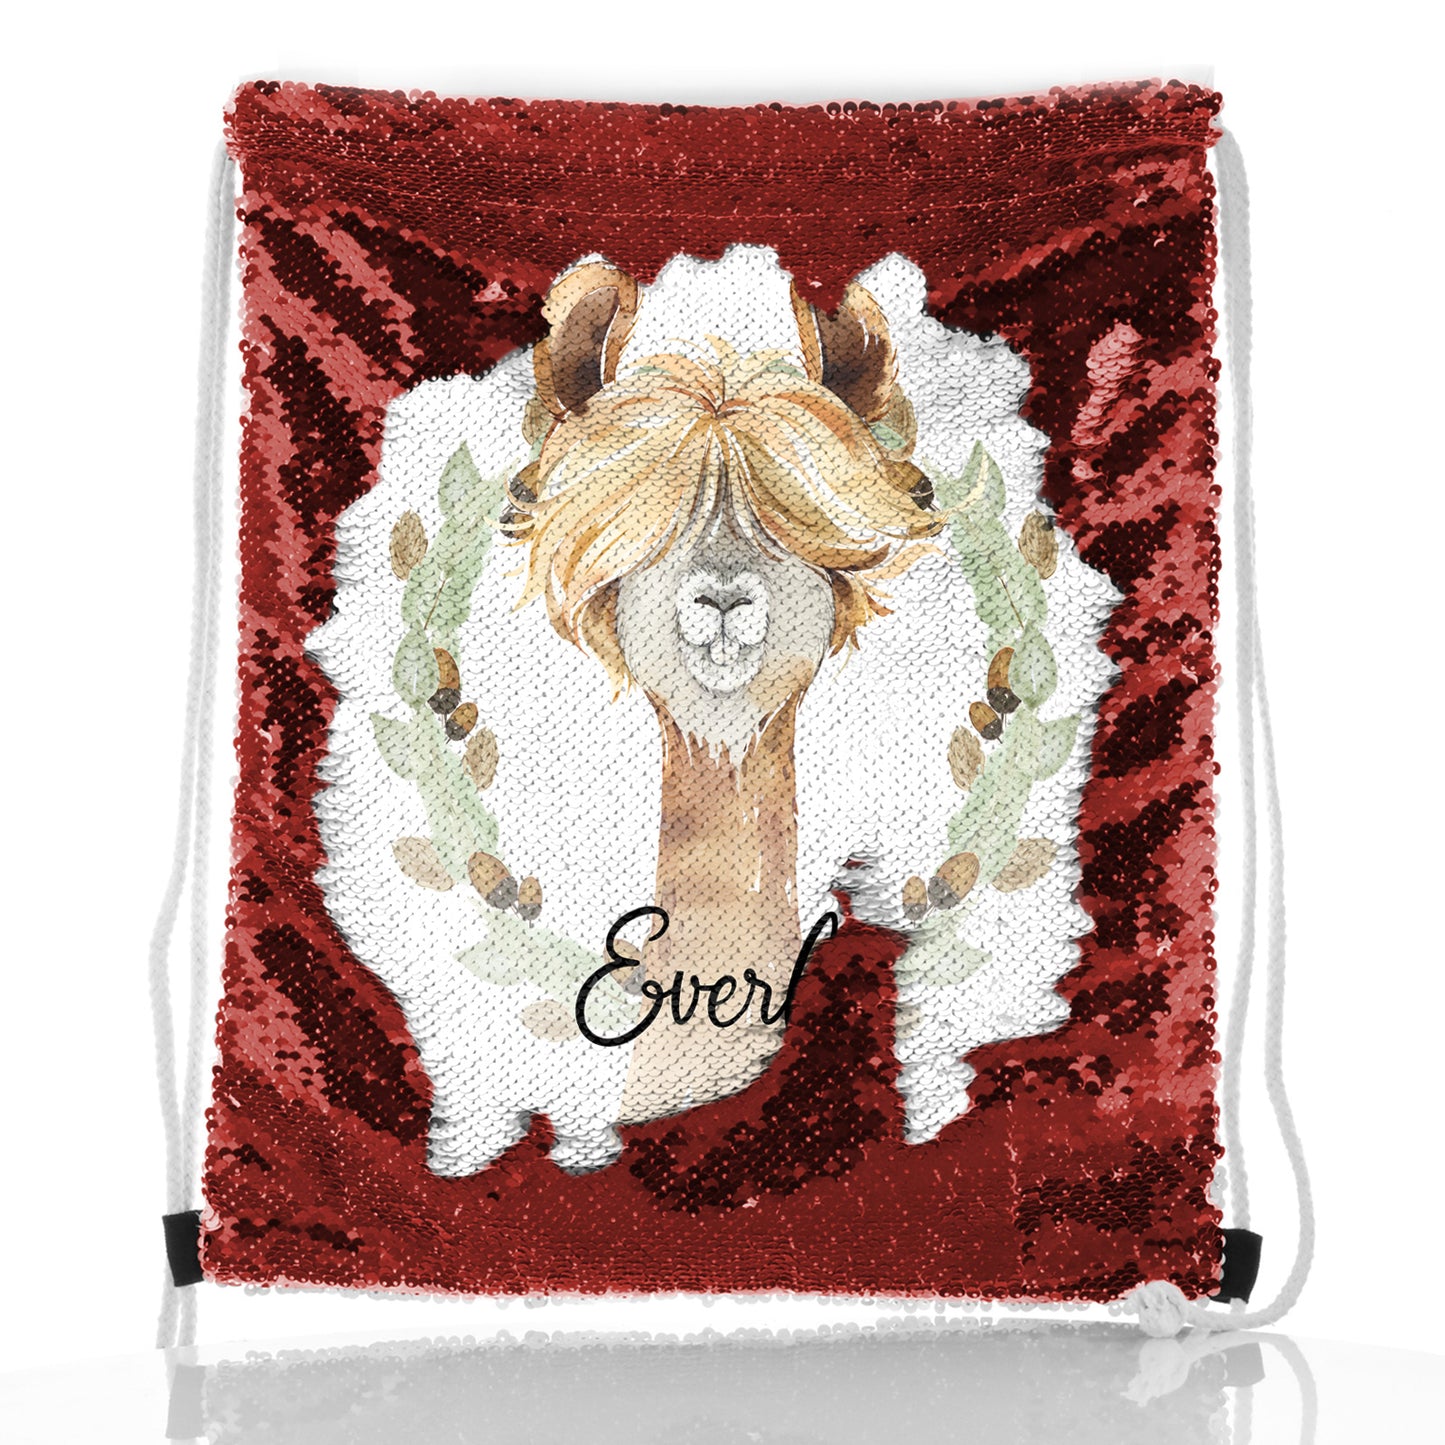 Personalised Sequin Drawstring Backpack with Brown Alpaca Acorn Wreath and Cute Text